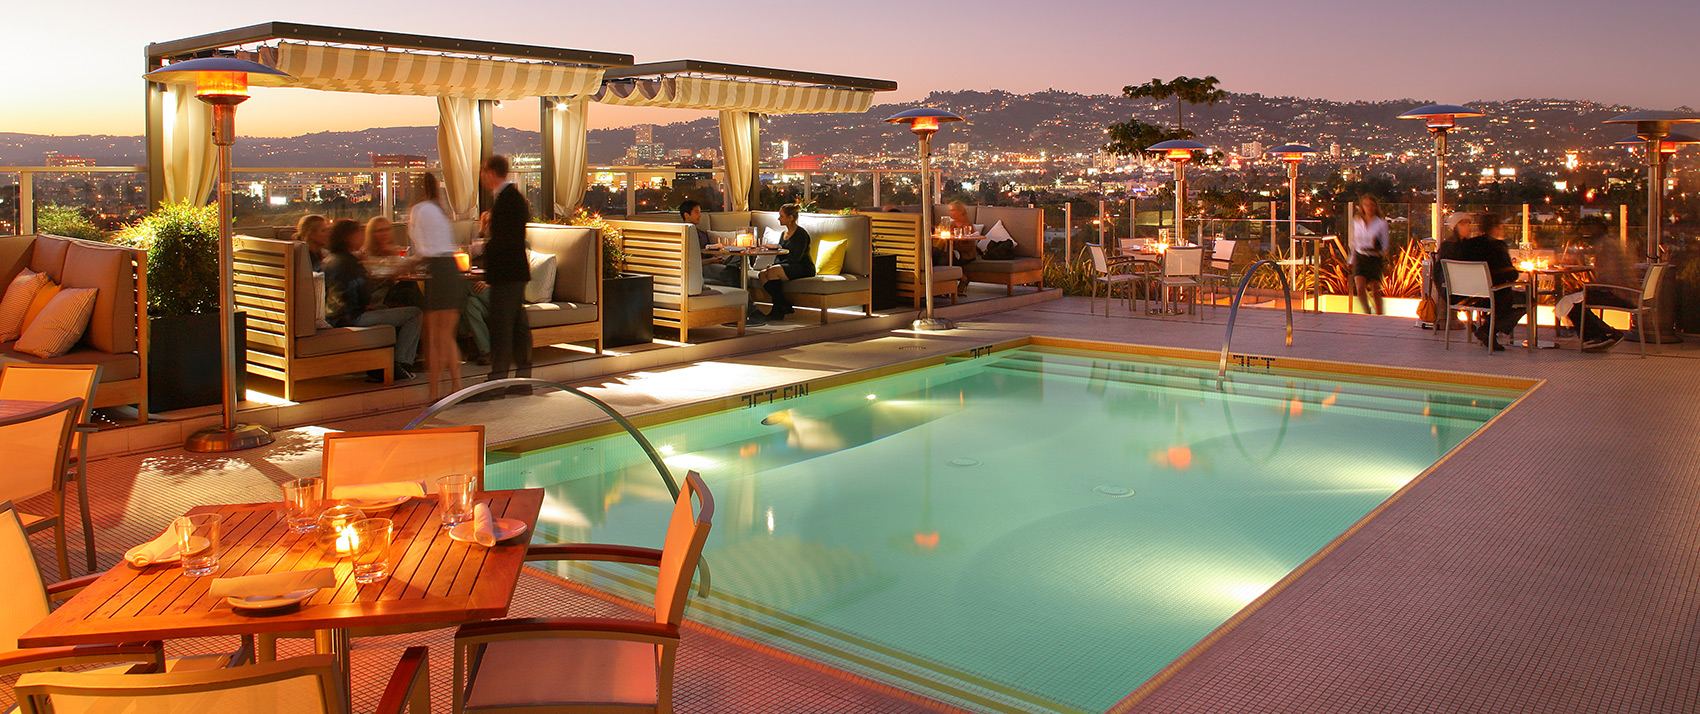 CF's Guide To The Best Pools In Los Angeles